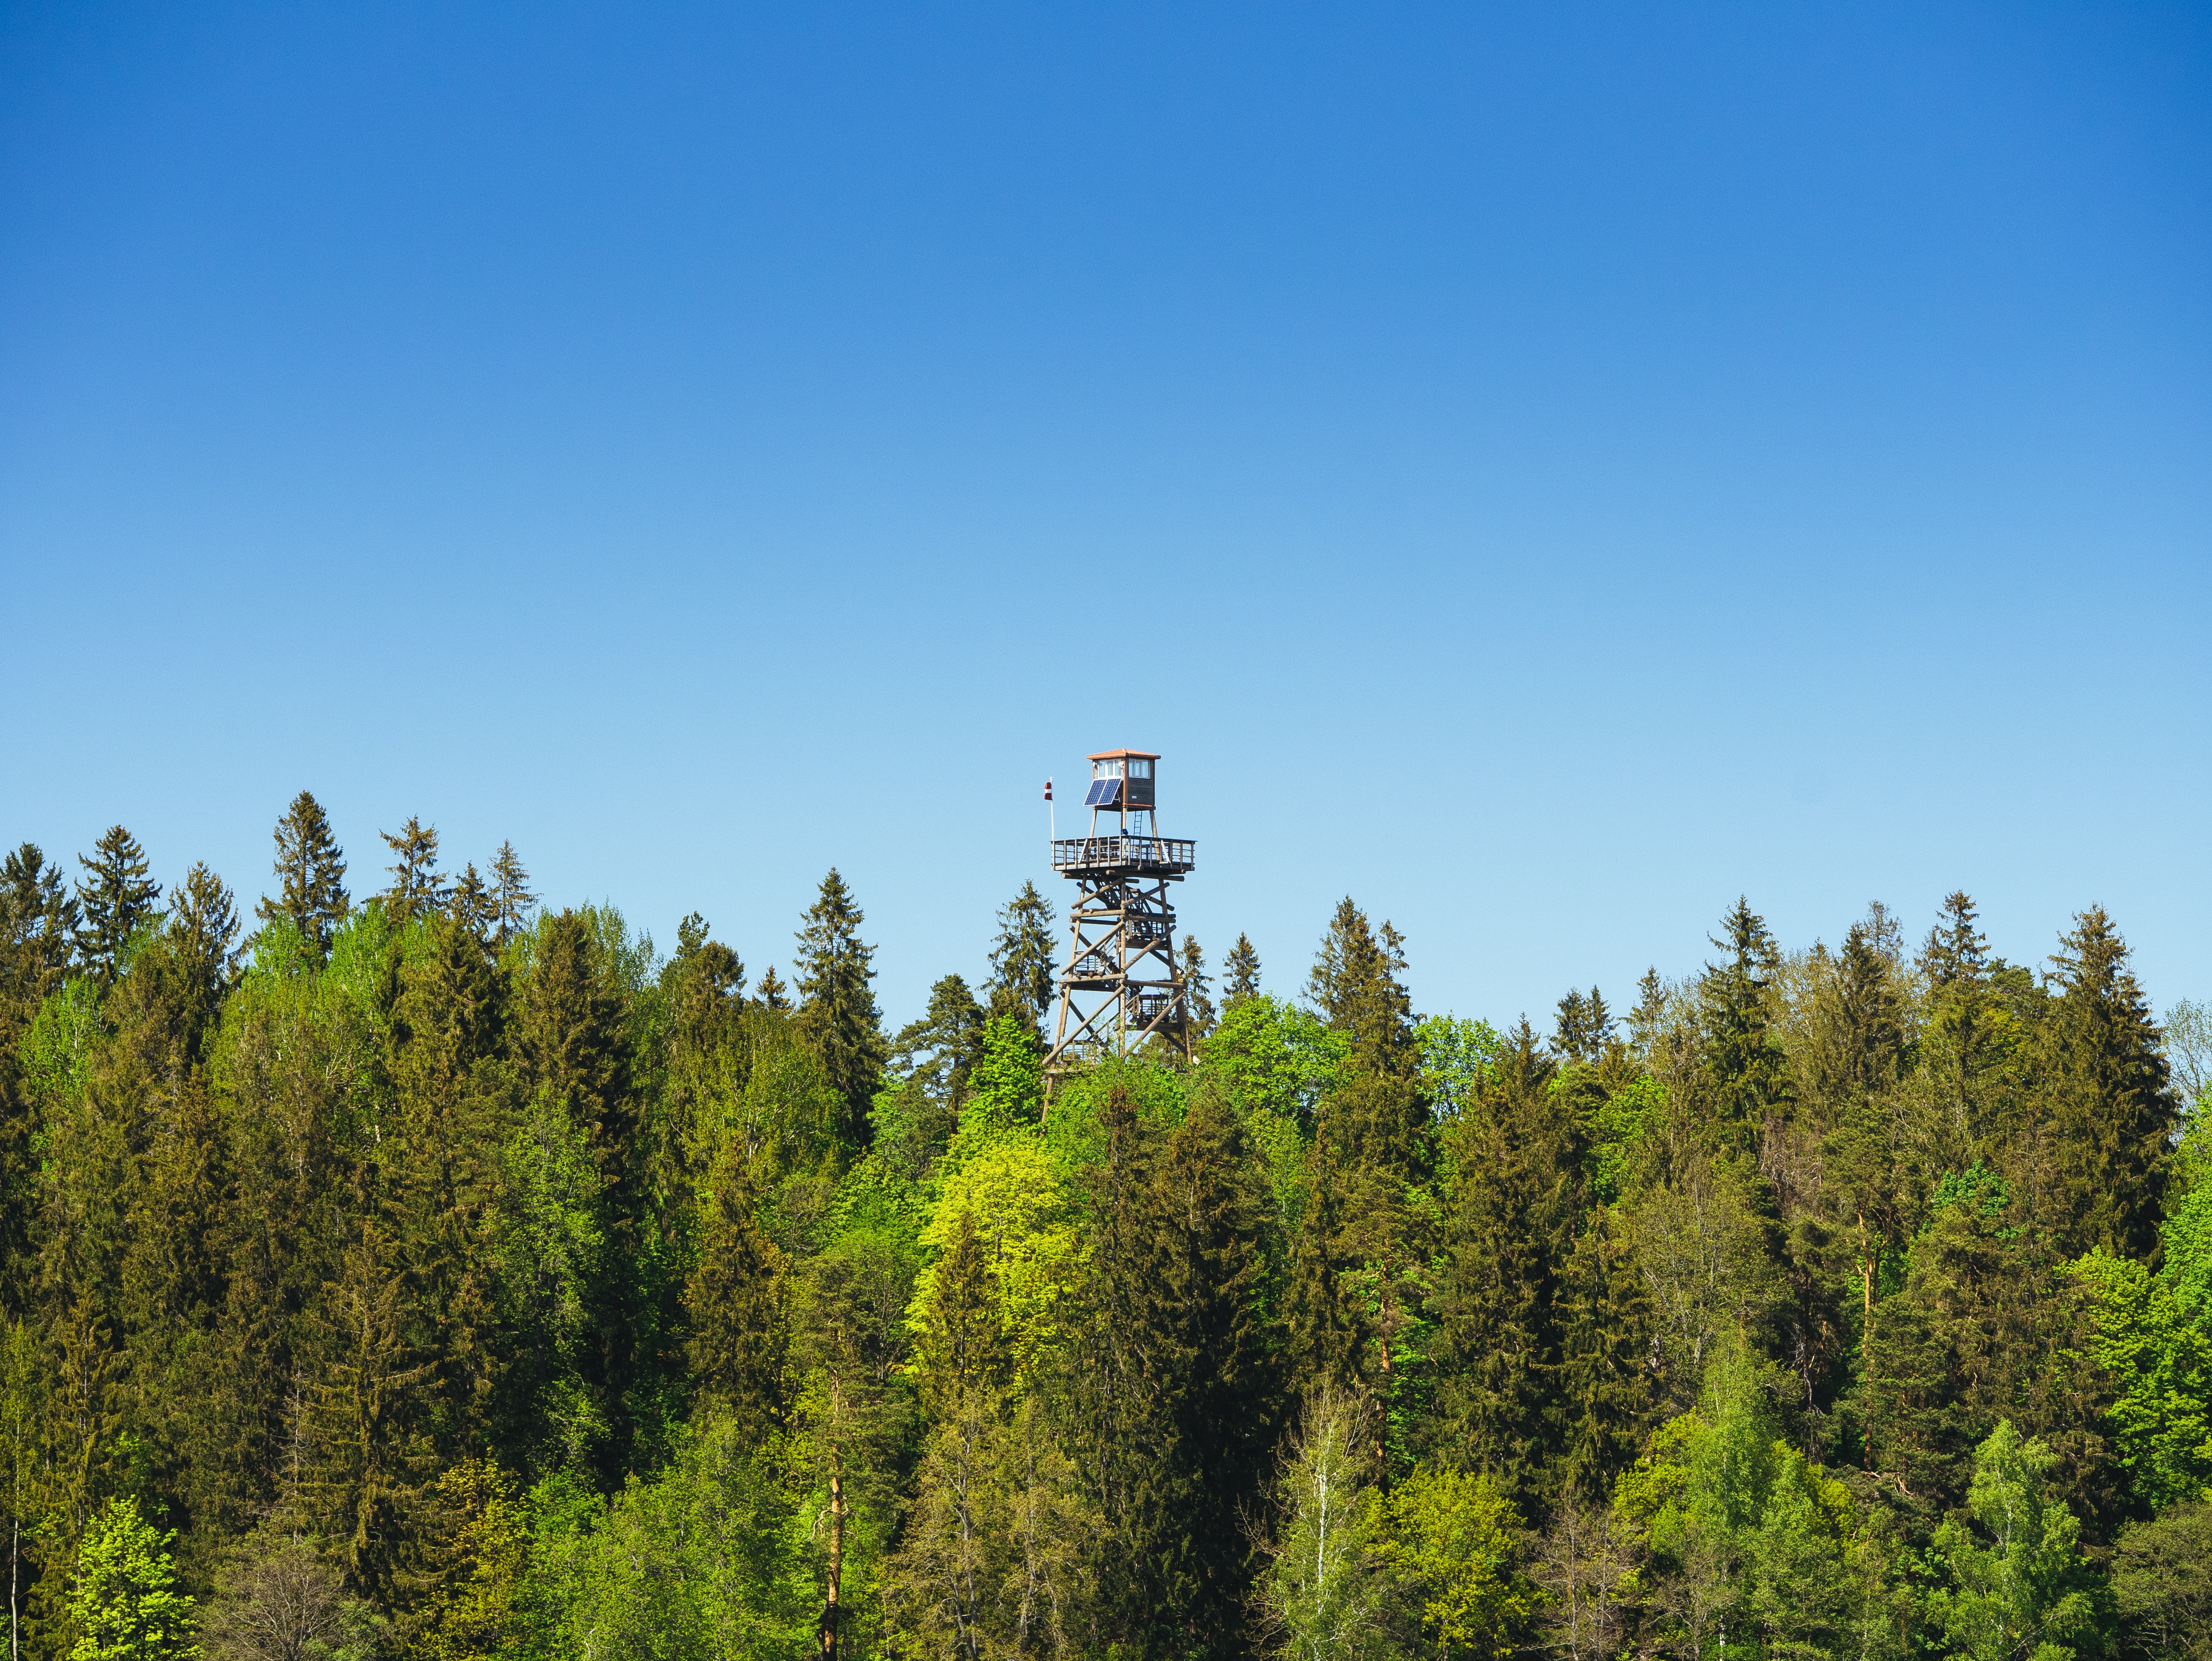 A fire lookout tower rises above the treeline.